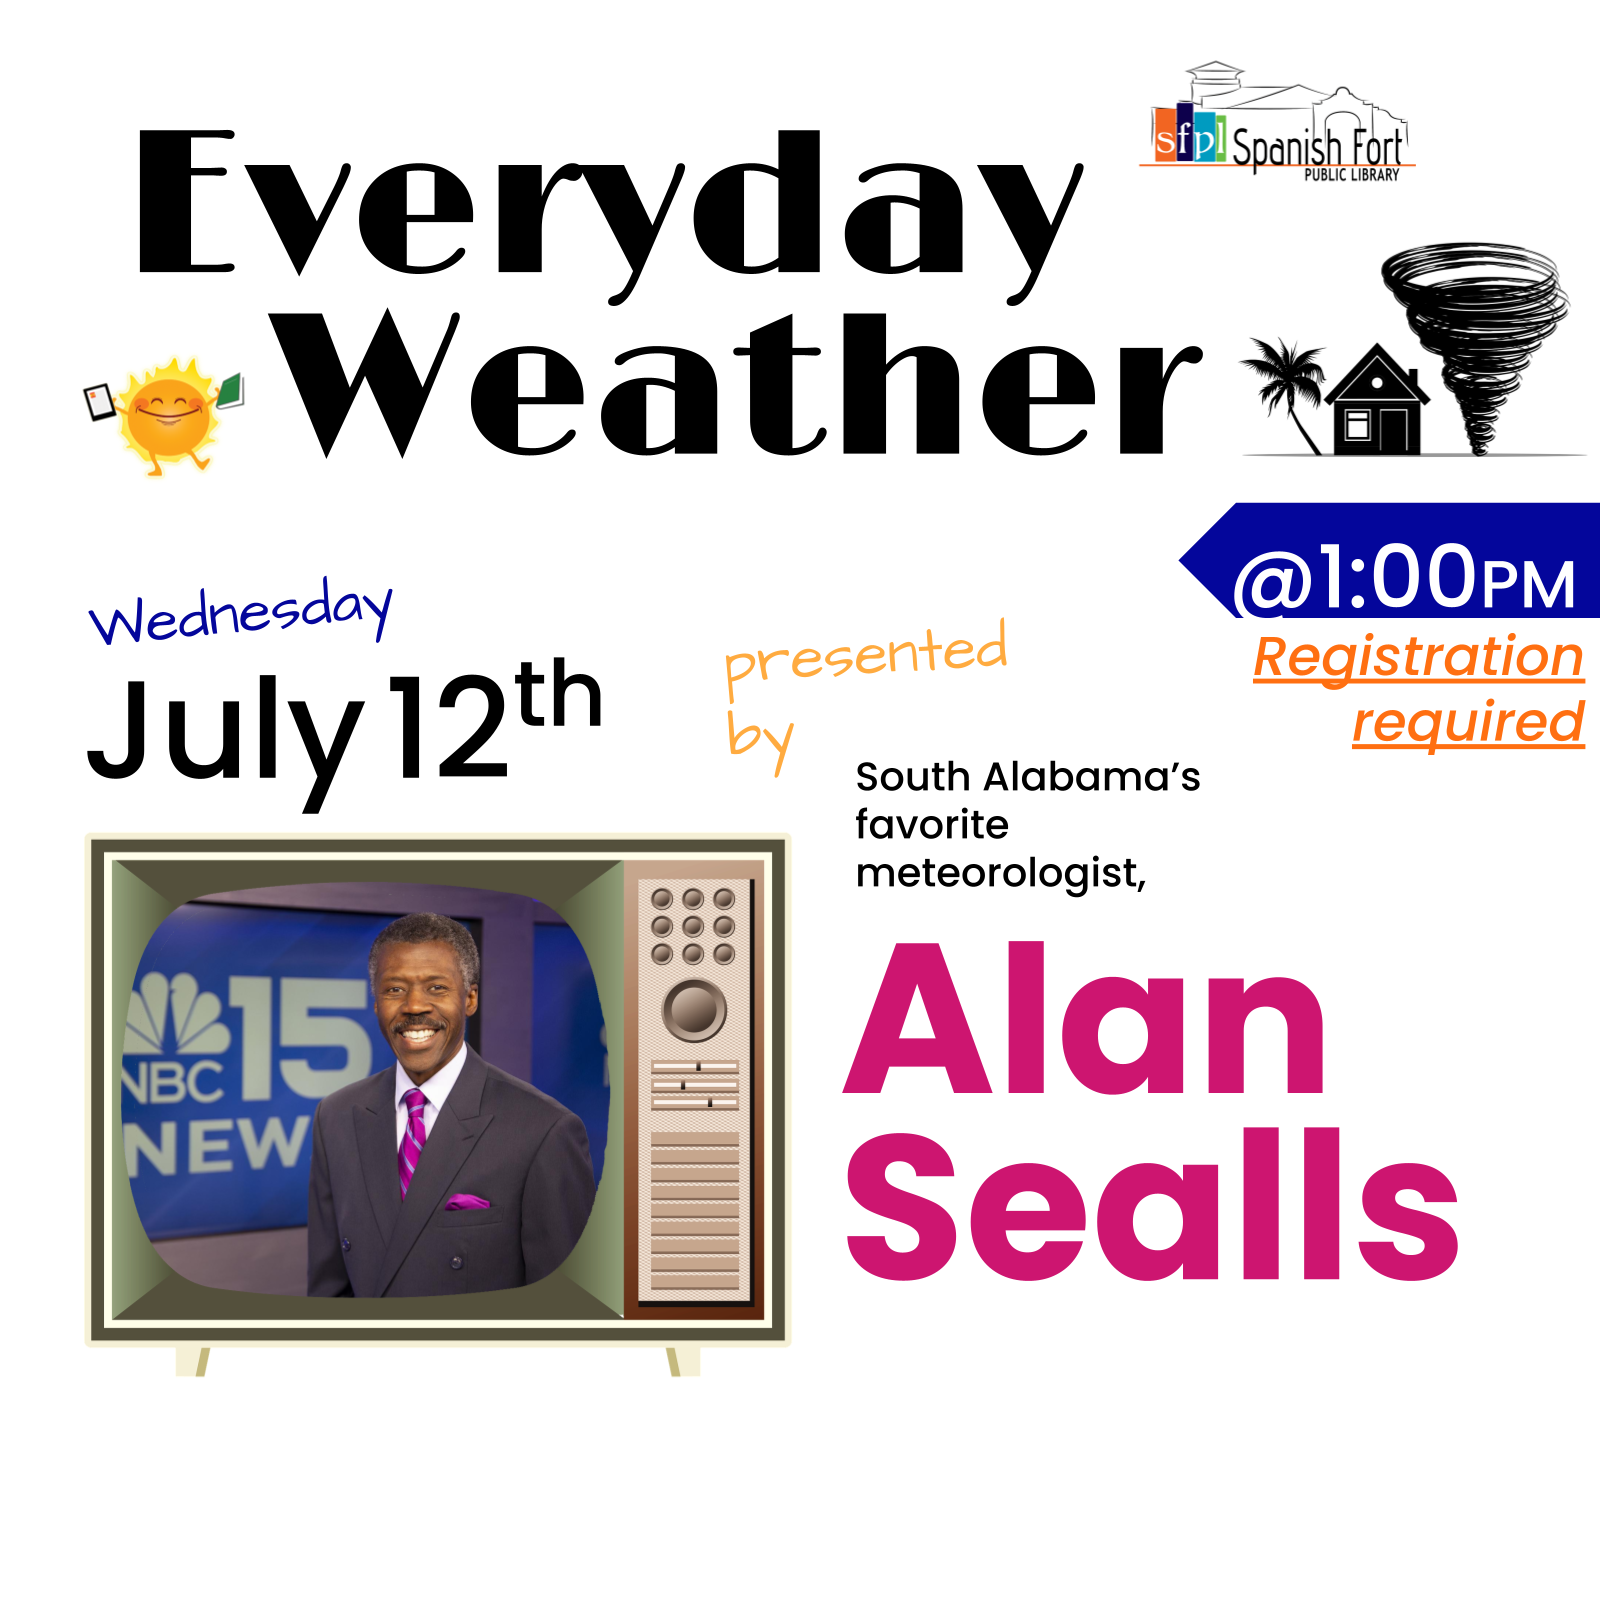 South Alabama's Favorite weatherman is back for summer reading at SFPL! Join in on the weather fun and learn some weather facts with MBC15's own, Alan Sealls